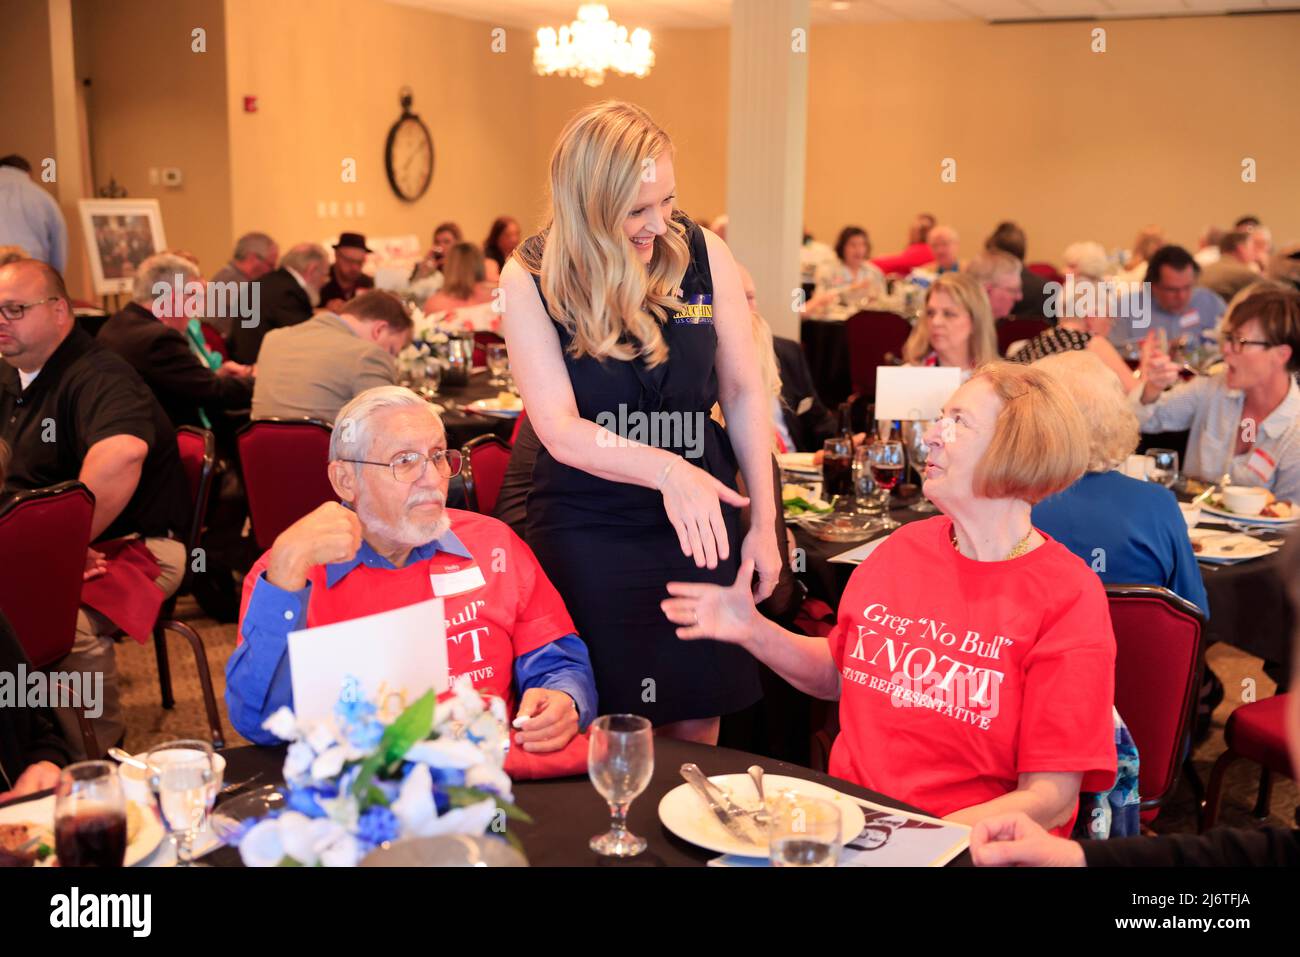 Indiana 9th District Republican candidate Erin Houchin greets potential constituents during the Monroe County Republican Party 2022 Lincoln Day Dinner in Bloomington. Houchin won the Republican primary Tuesday night and will face Democrat Matt Fyfe, from Bloomington, in the fall midterm election. Houchin refers to herself as a “Trump Conservative.” (Photo by Jeremy Hogan / SOPA Images/Sipa USA) Stock Photo